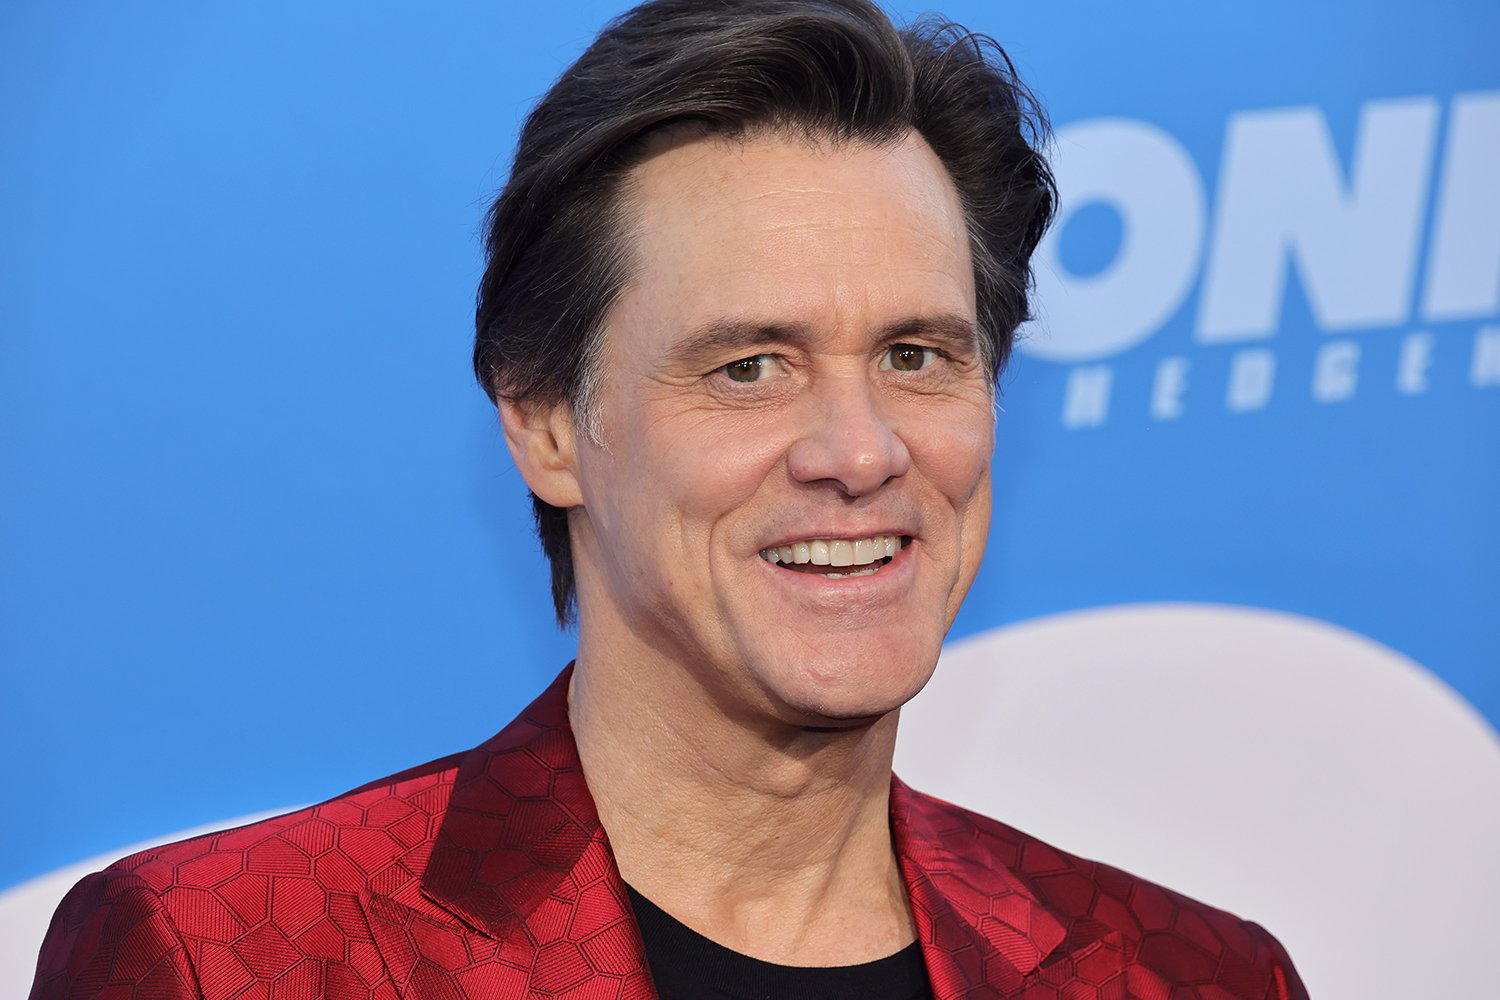 Jim Carrey's Goal During Retirement Is to 'Frighteningly Normal'